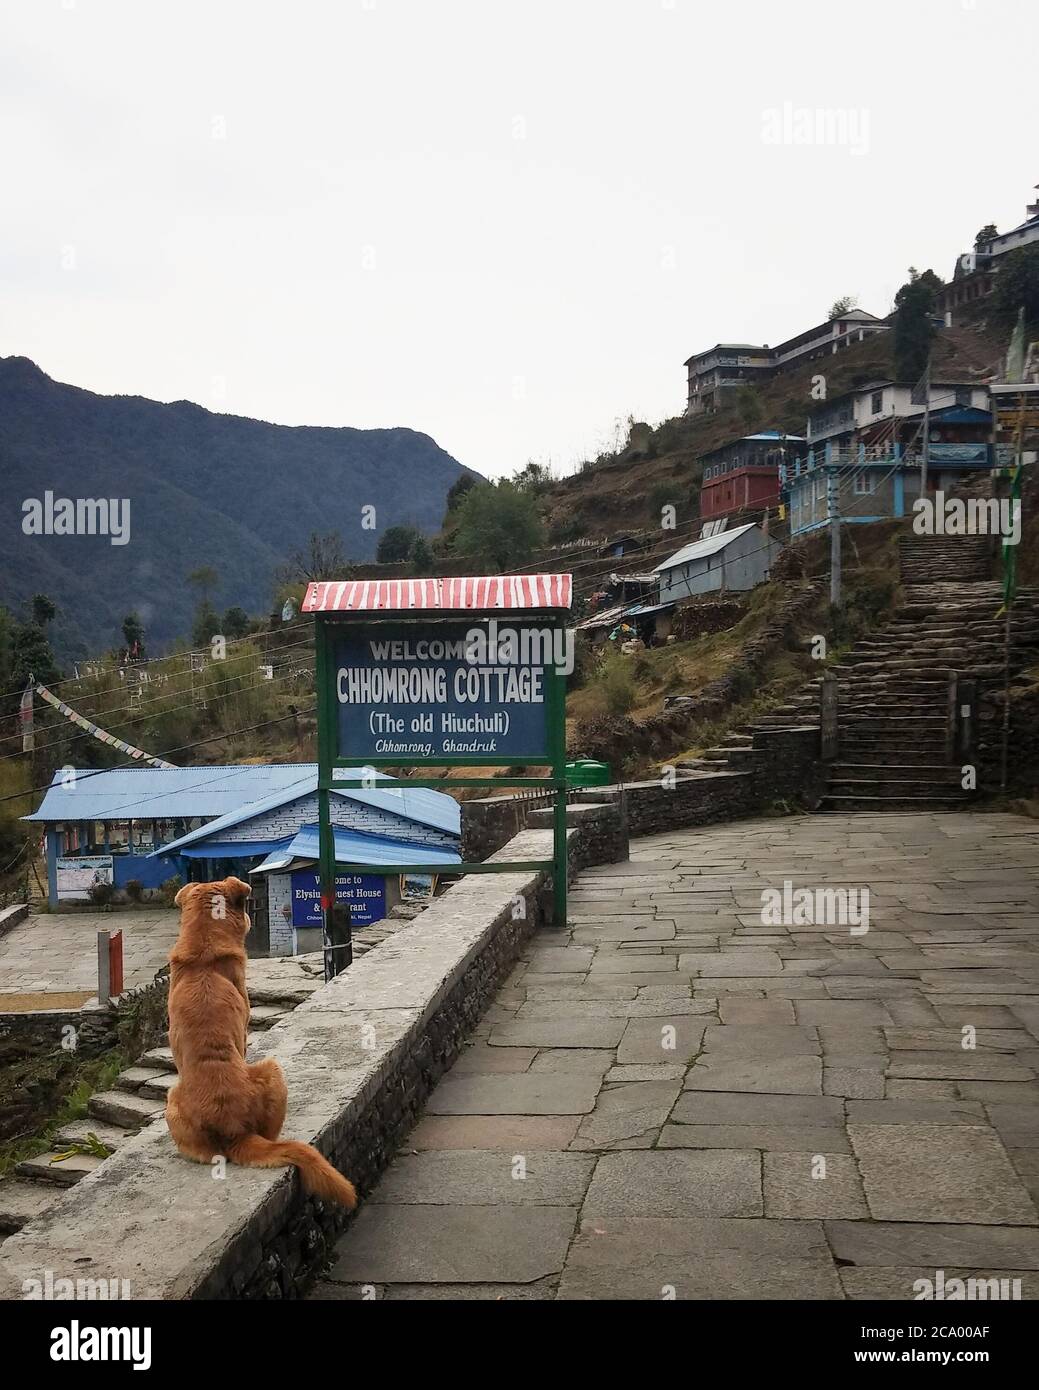 Pokhara, Nepal - Chomrong, a village in the middle of Annapurna Himalayas. The dog sitting alone on a stone wall. Annapurna Base Camp trekking course. Stock Photo